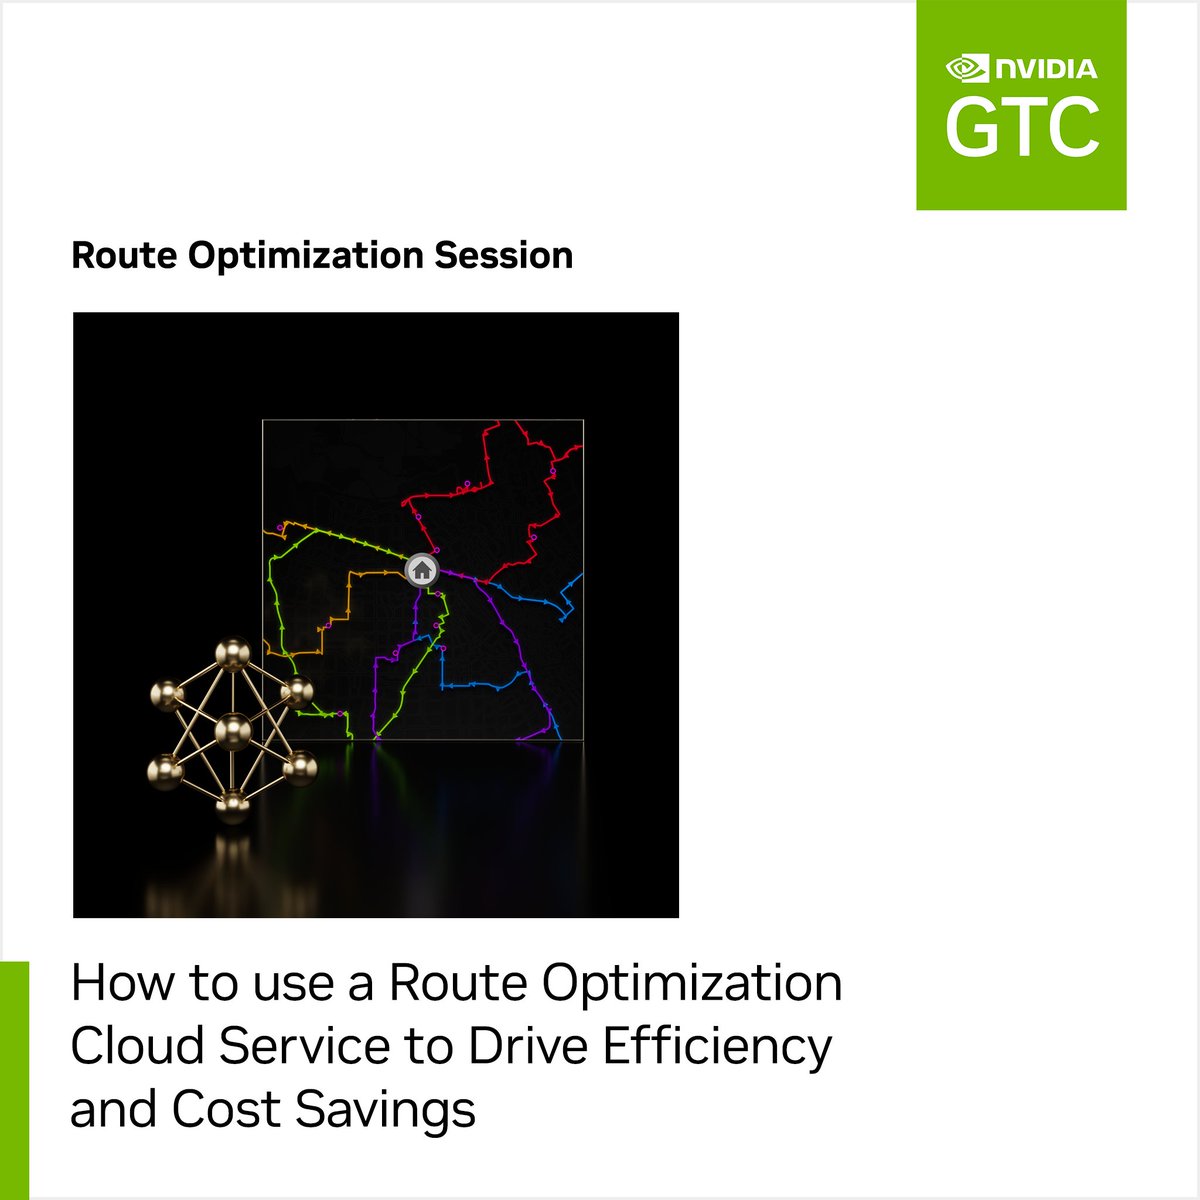 Discover advanced AI techniques to optimize routes for deliveries, pickups, dispatching jobs, and more that can significantly save time, resources, and money. Watch this on-demand hands-on lab > nvda.ws/3TPXlKo

#cuOpt #RouteOptimization #GTC24